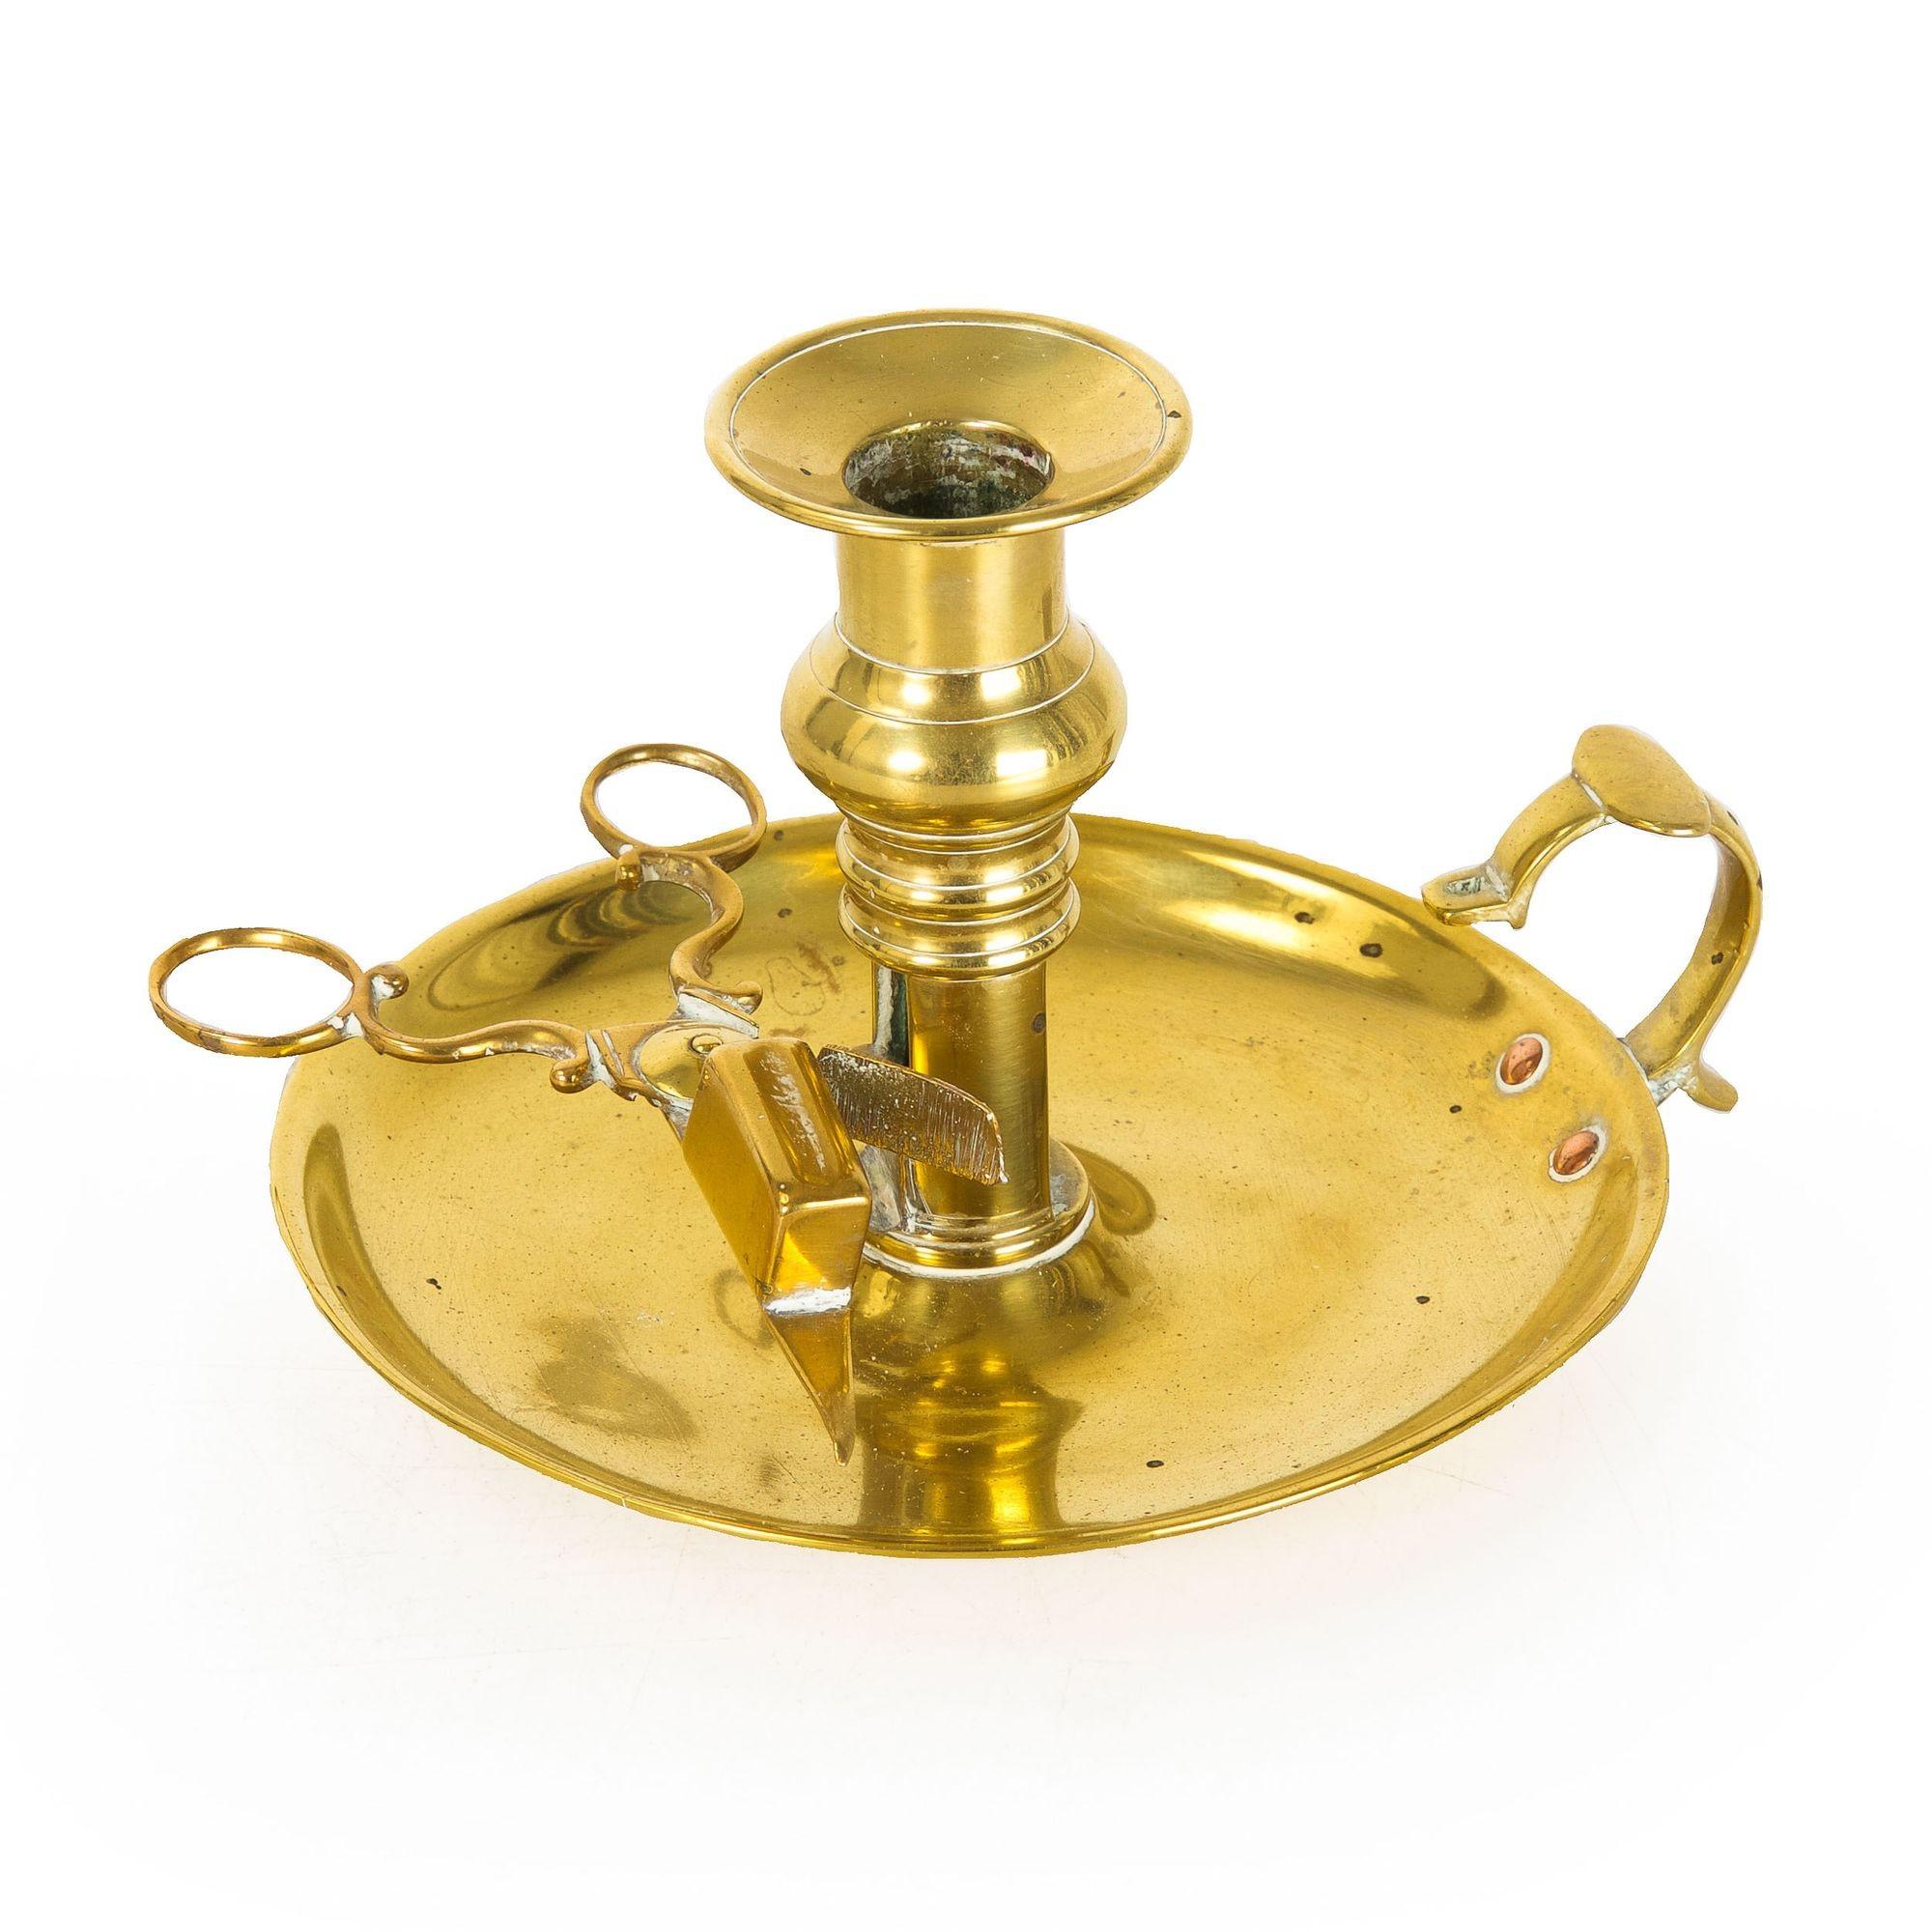 English Georgian Antique Chamberstick Candlestick W/ Wick Trimmer
Item #  107PQP29L-3 

A very nice circular brass chamberstick from the first quarter of the 19th century, it features a working candle ejector and retains an early and likely original